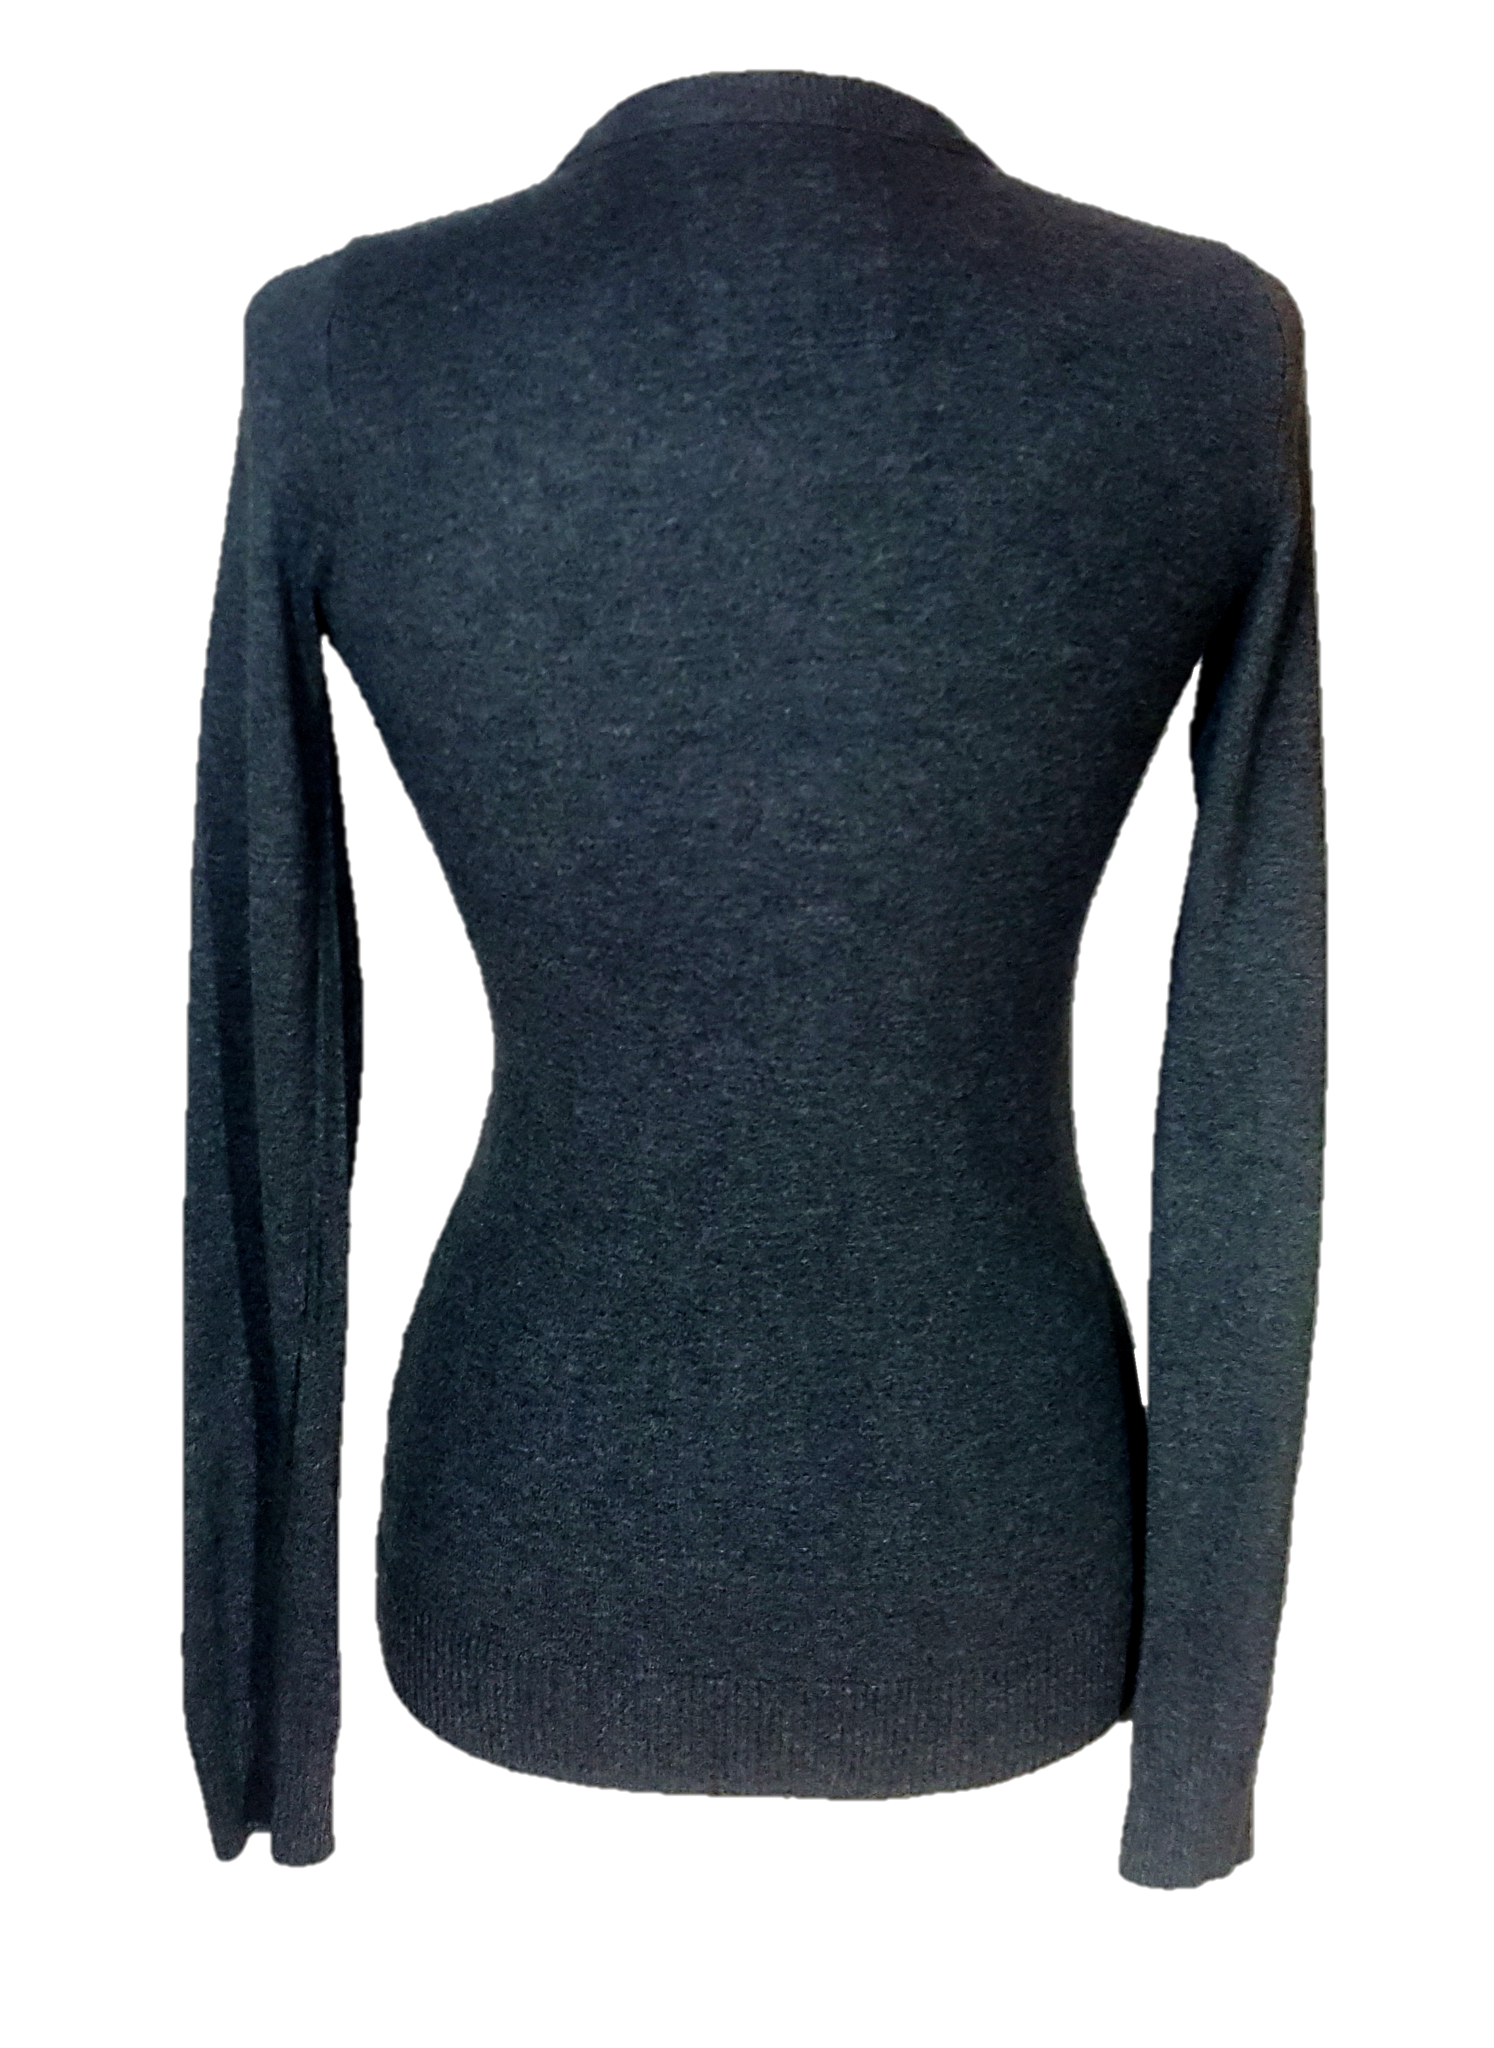 Hollister- For Those Chilly Days Knit Cardigan